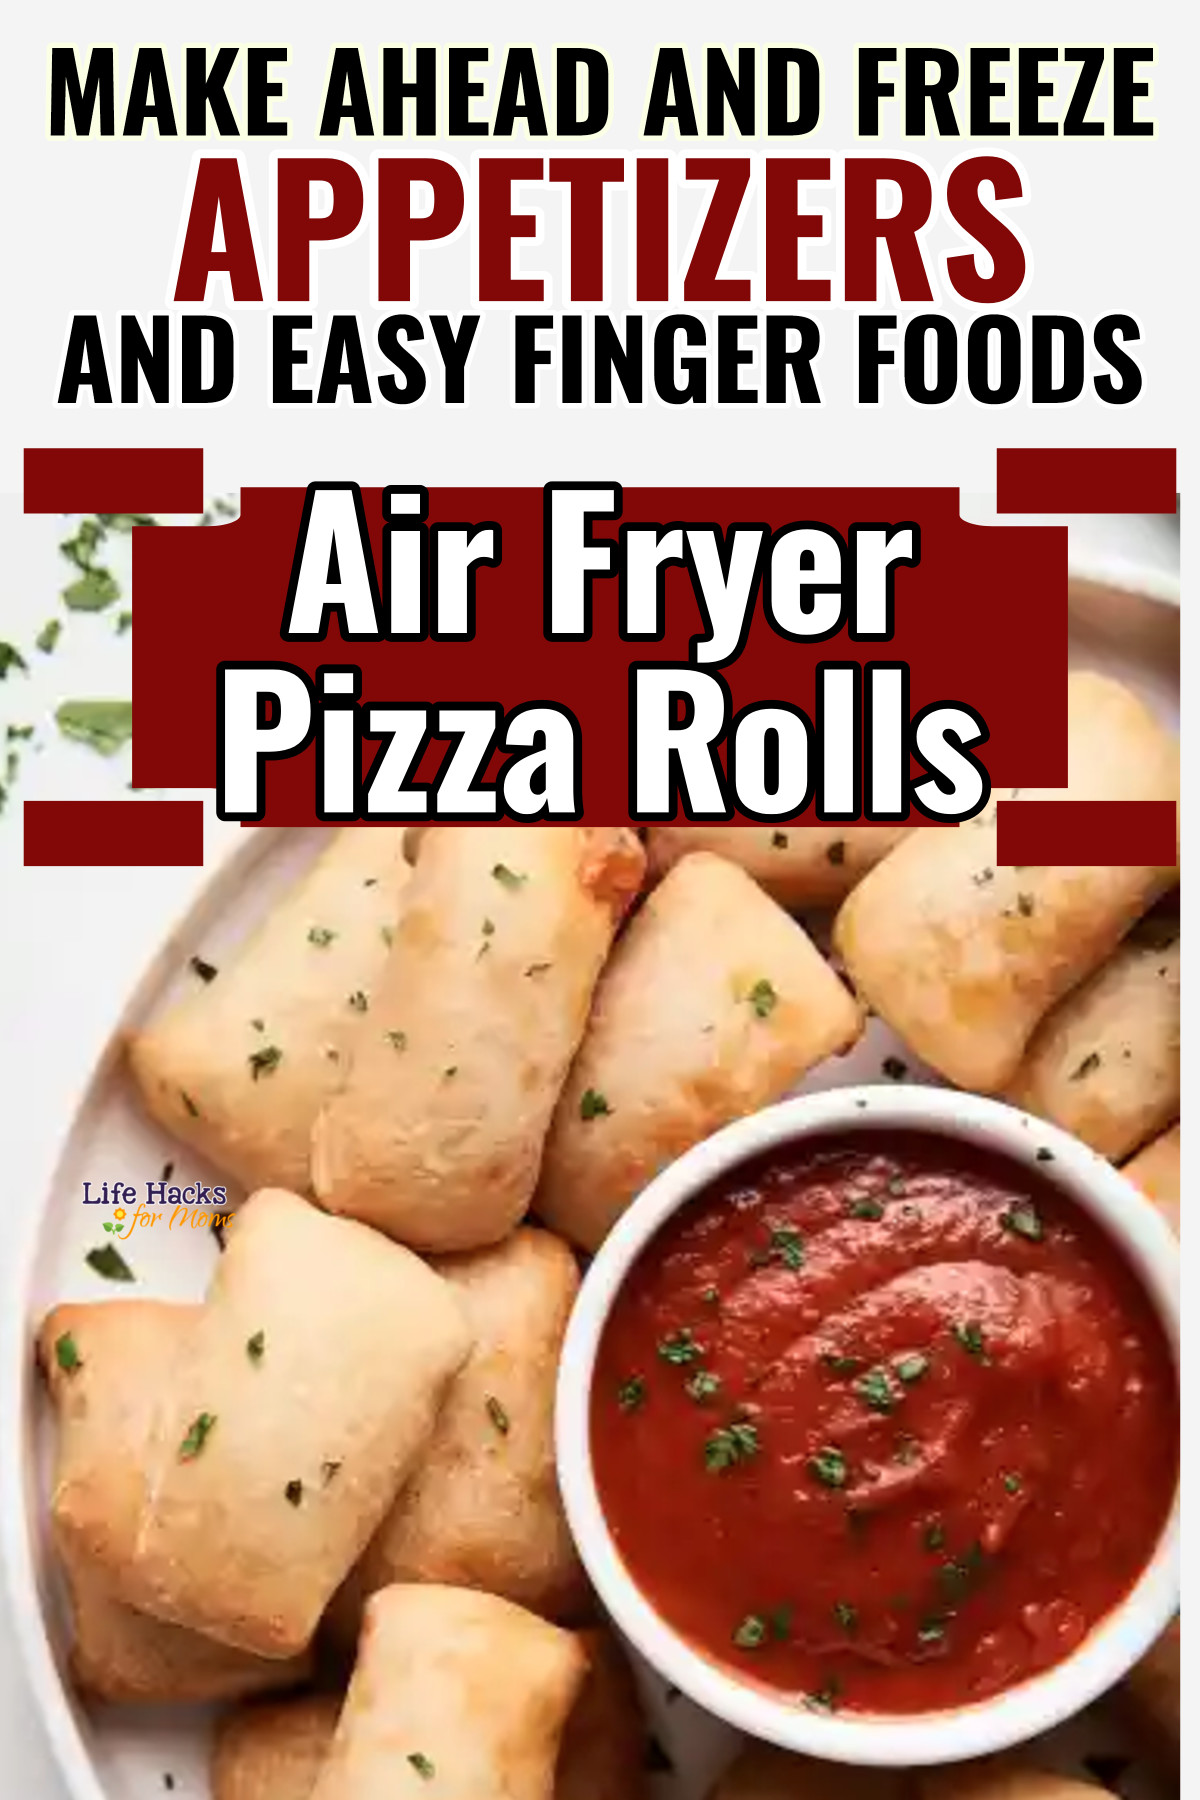 Make Ahead And Freeze Appetizers - Air Fryer Pizza Rolls